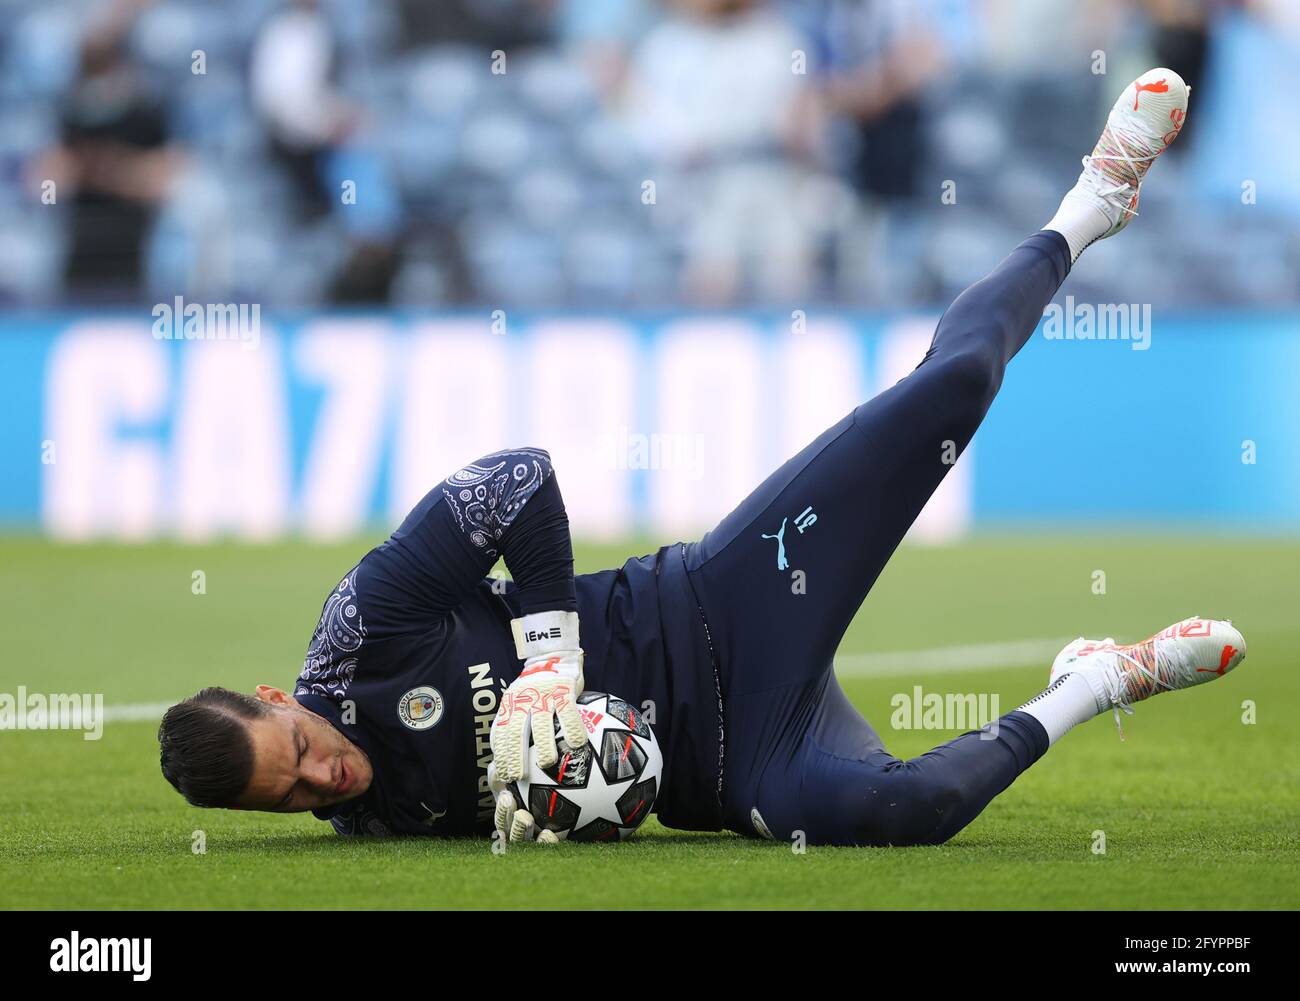 PORTO, PORTUGAL - MAY 29: Ederson of Manchester City warms up during the  UEFA Champions League Final between Manchester City and Chelsea FC at  Estadio do Dragao on May 29, 2021 in